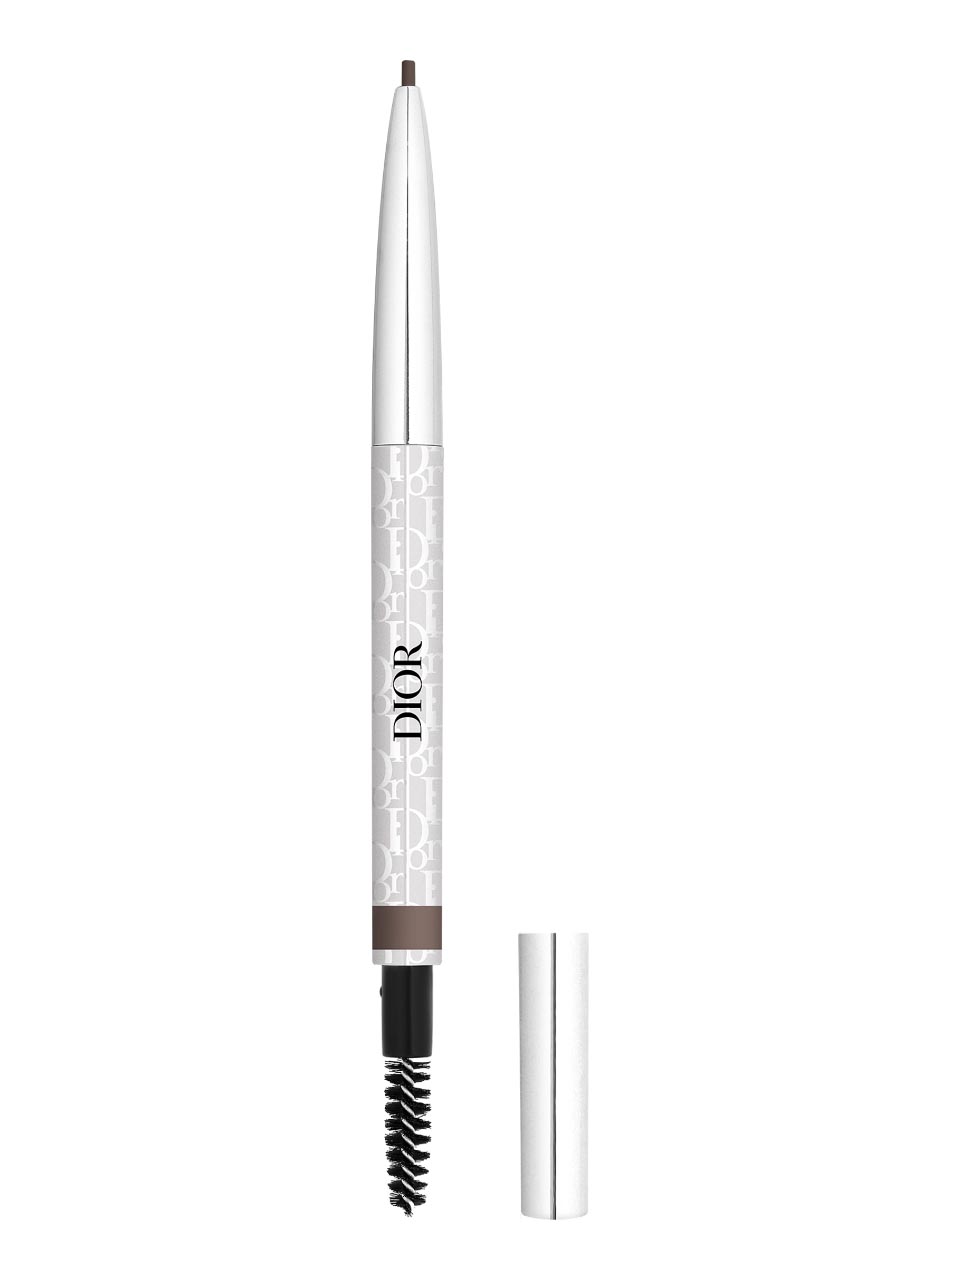 Dior Diorshow Brow Styler Eye Brow Pencil N° 003 Brown null - onesize - 1